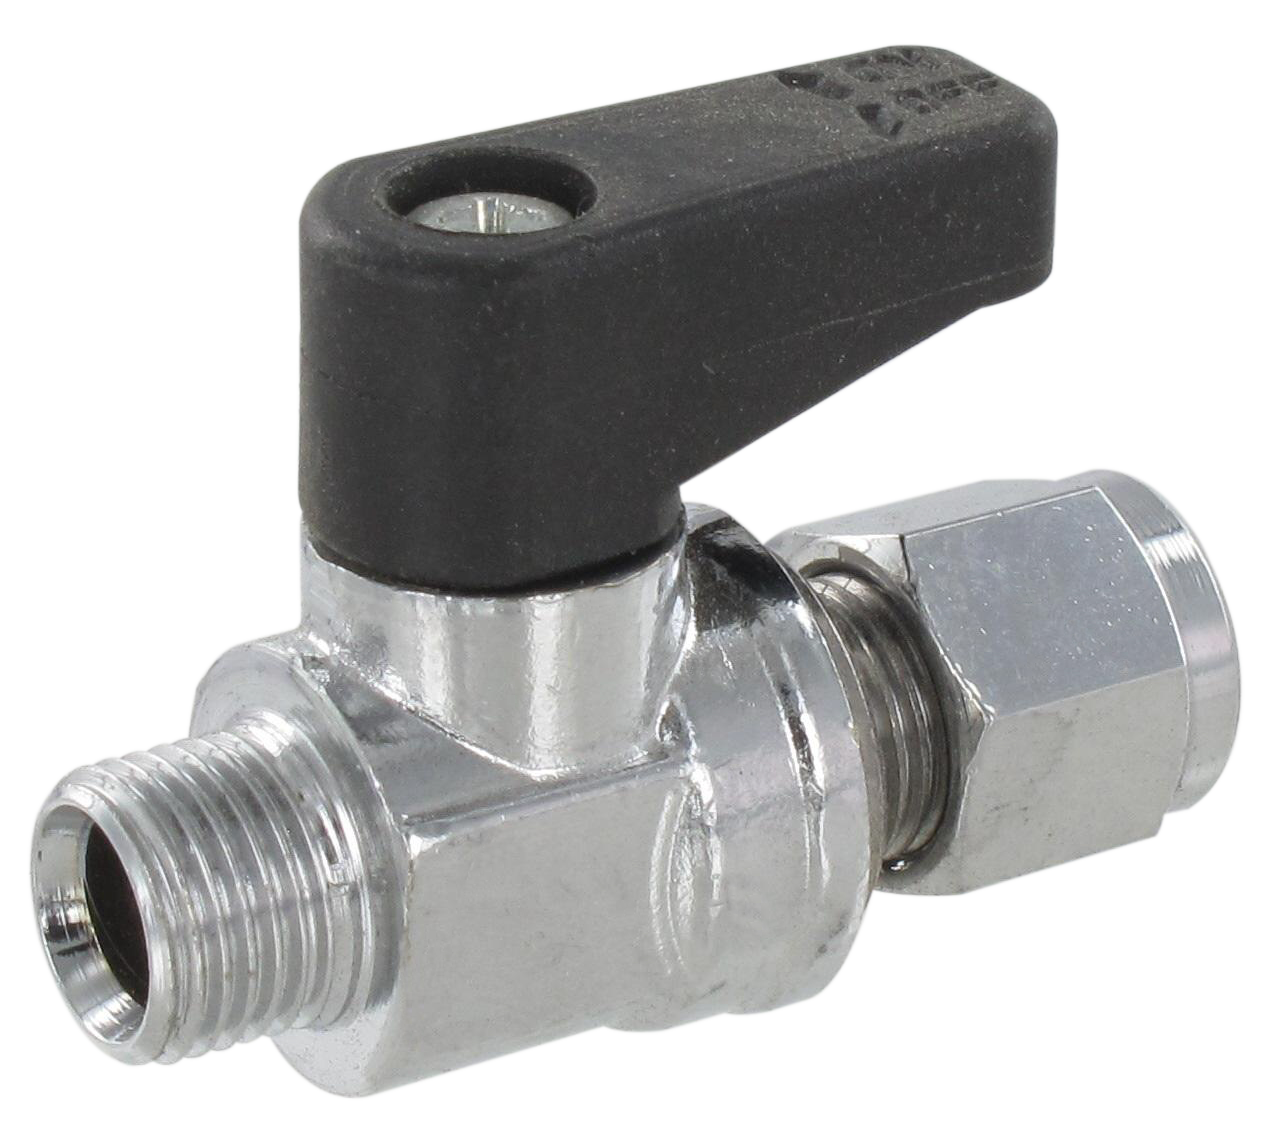 BSP threaded ball valves with universal compression fittings